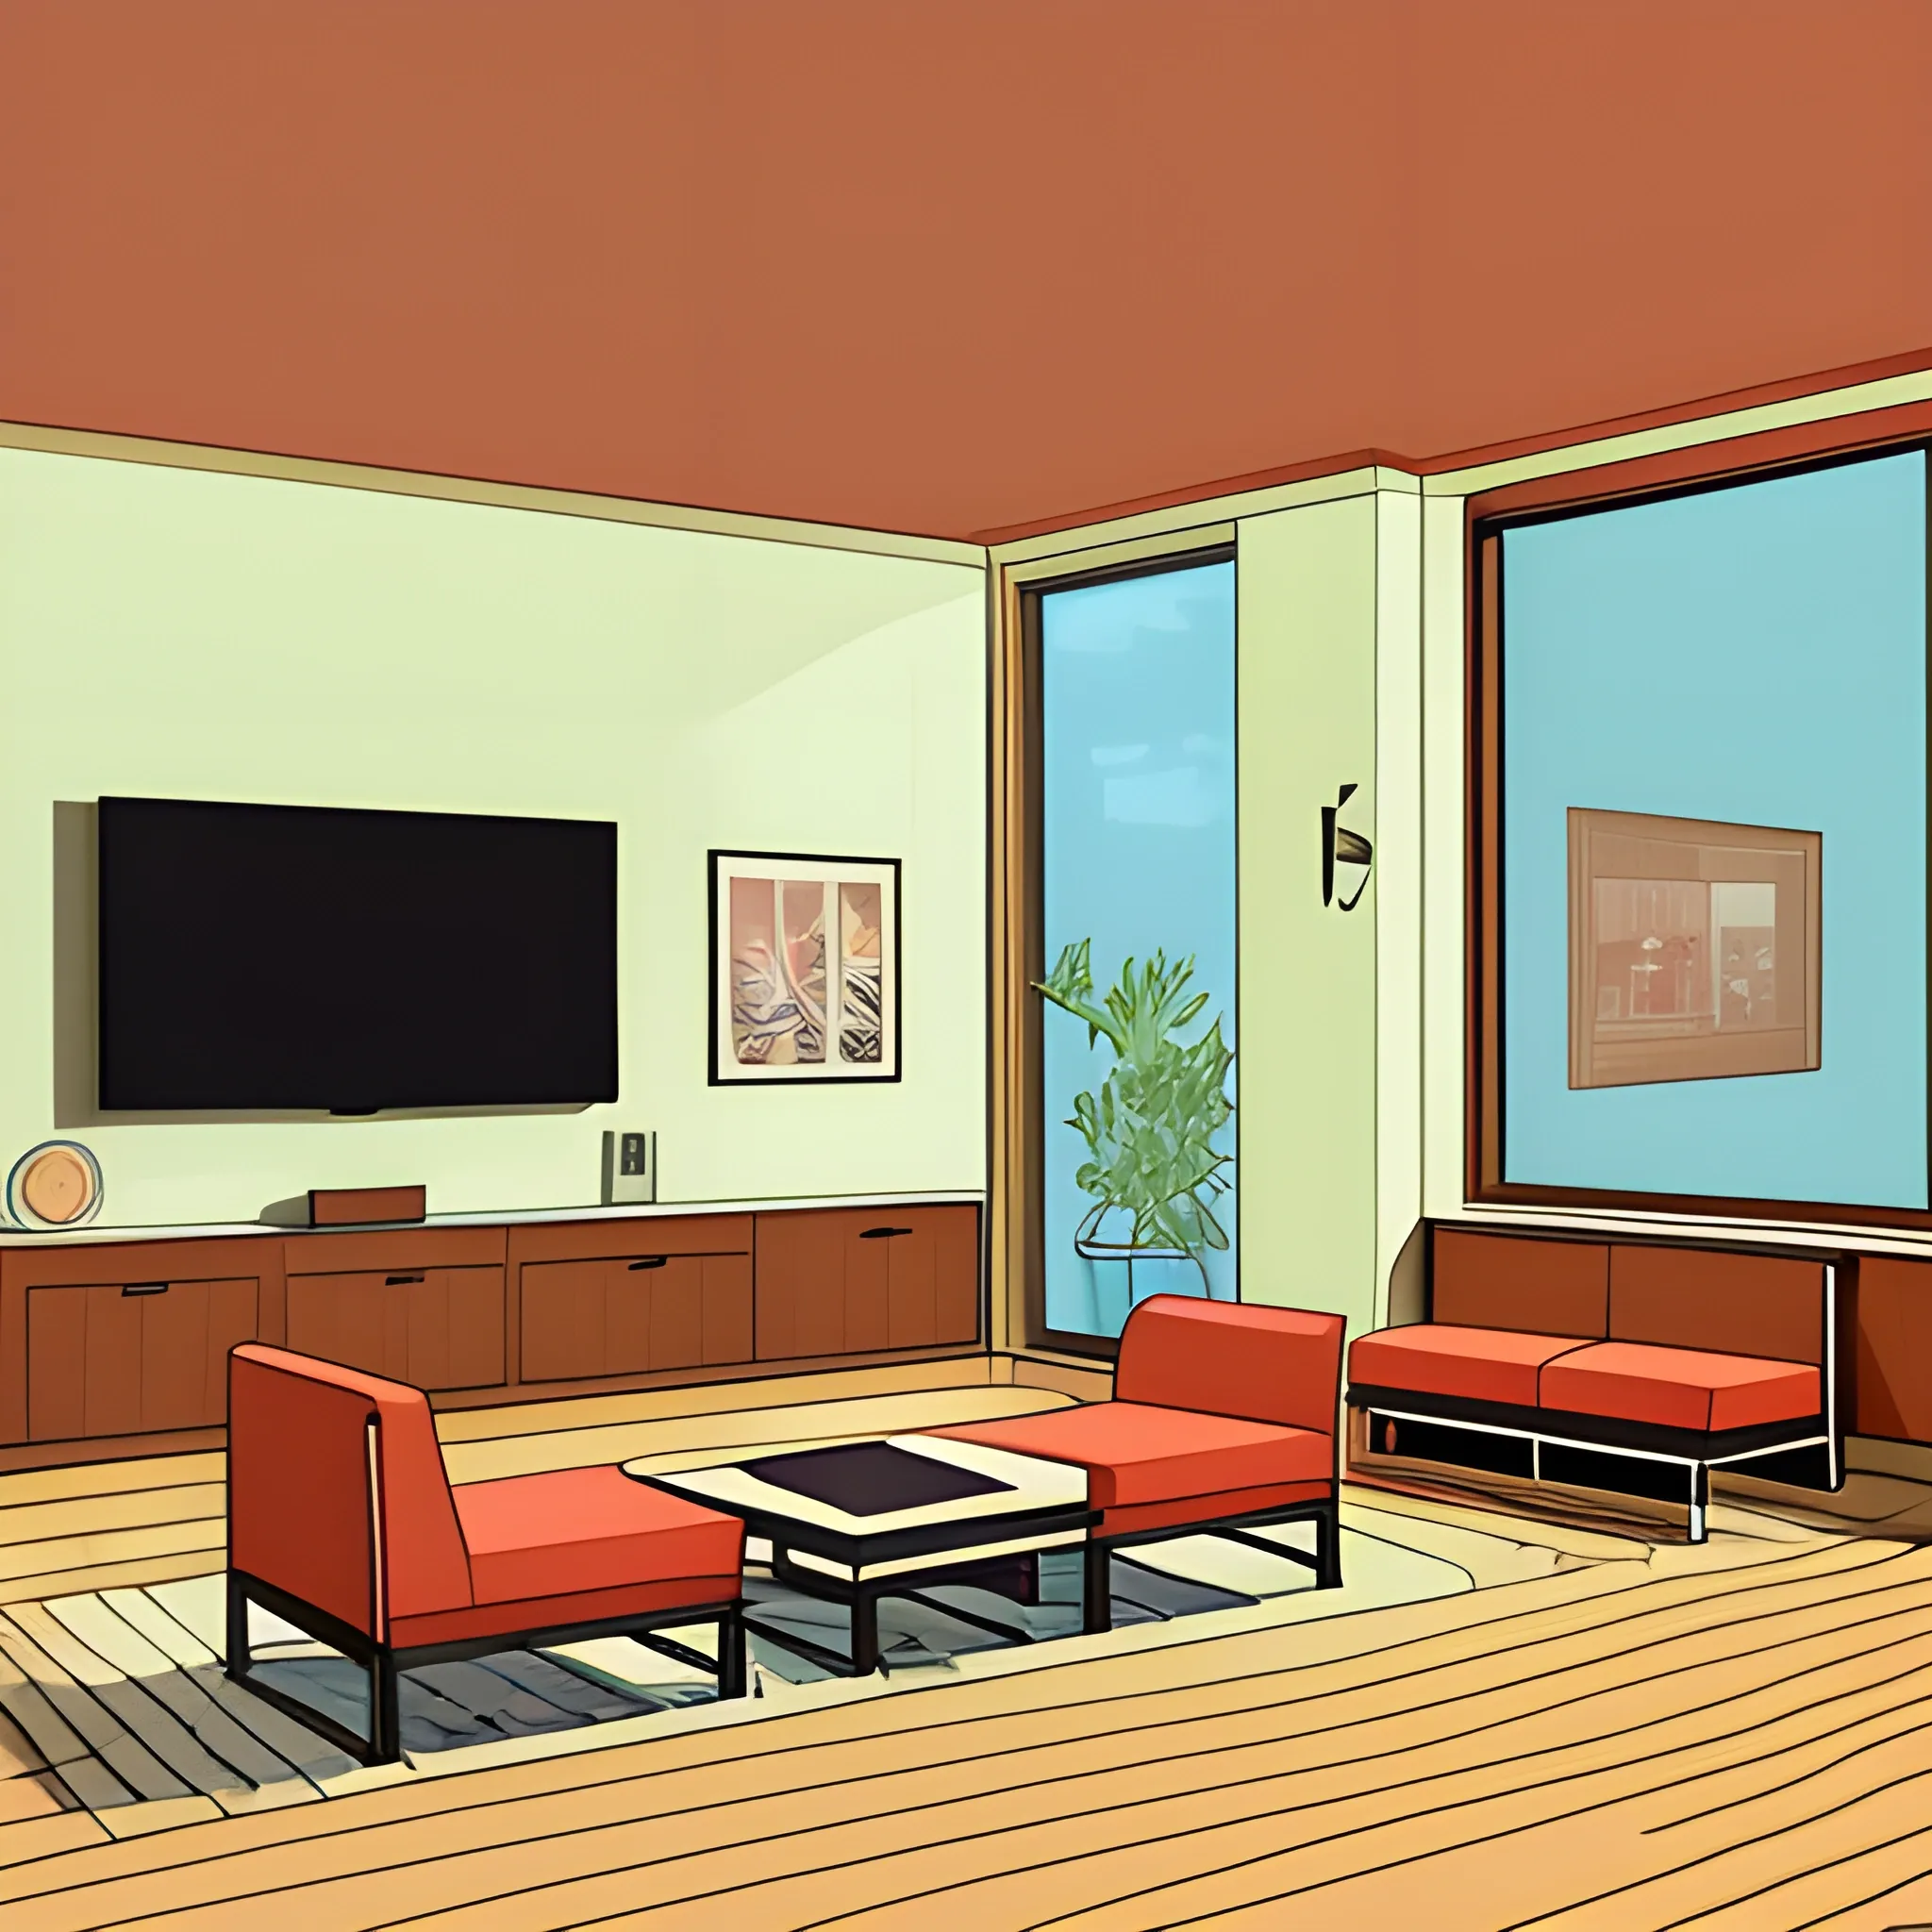 living room with table and benches with a television on the front wall, with frontal viewing angles, with digital drawing style in warm colors.